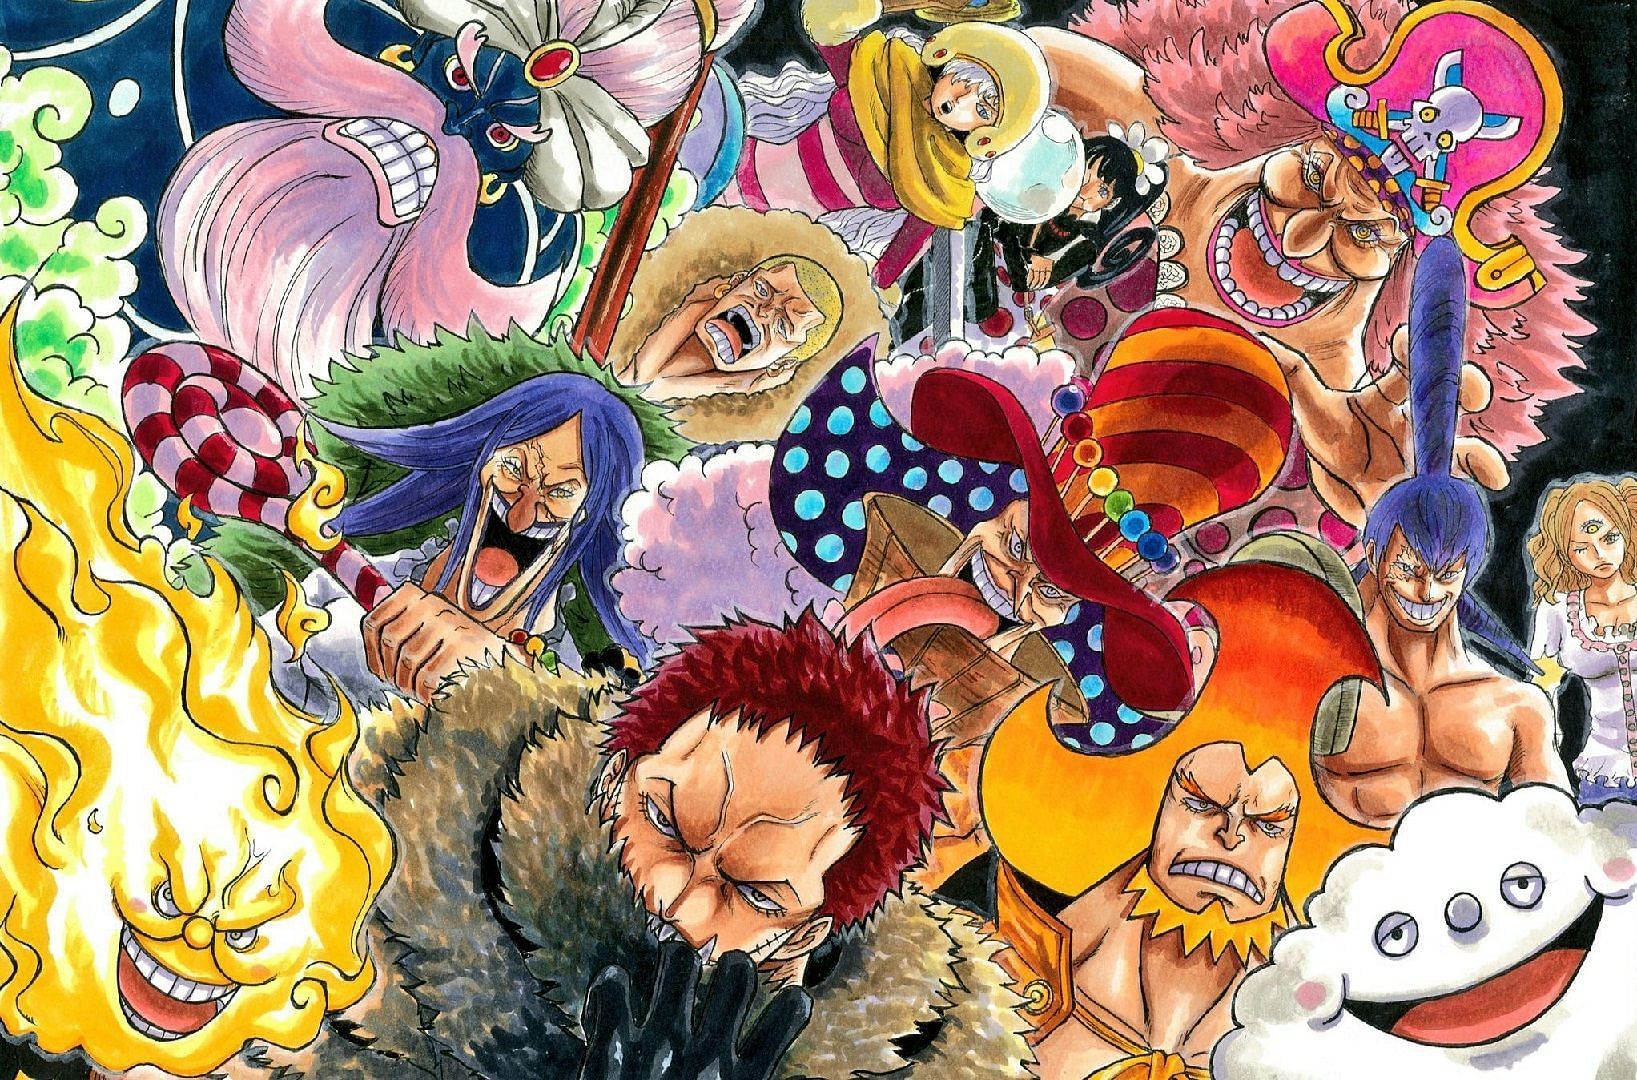 The main executives in the Big Mom Pirates are referred as &quot;Sweet Commanders&quot; (Image via Eiichiro Oda/Shueisha, One Piece)